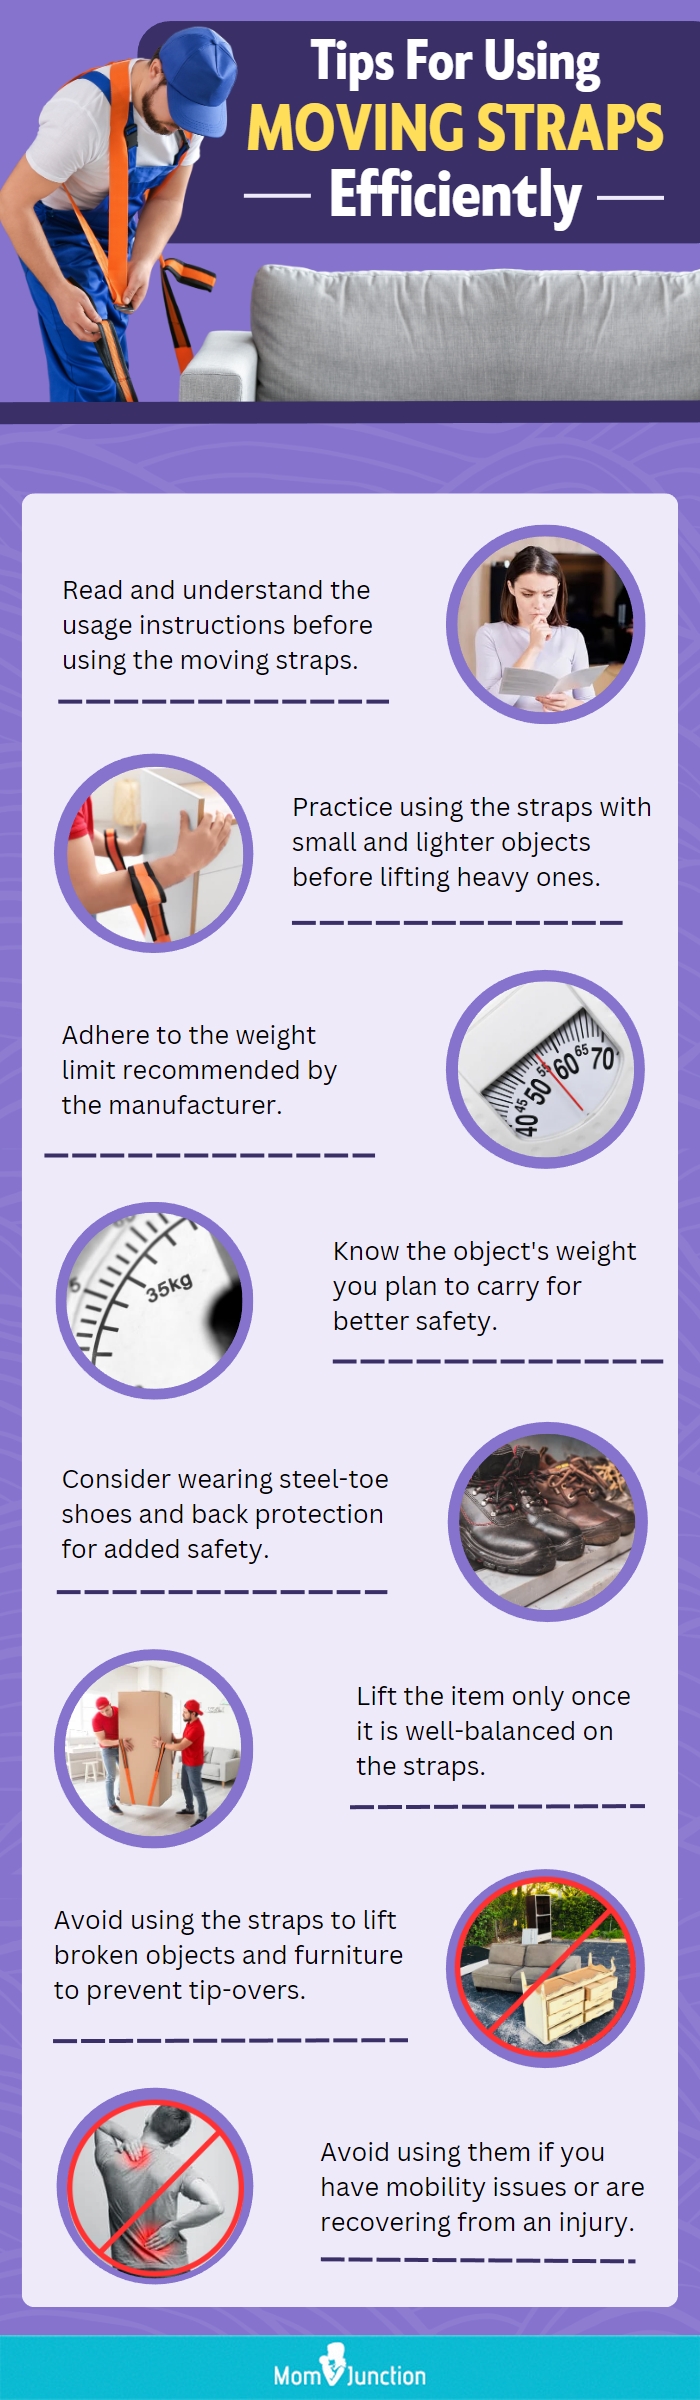 Tips For Using Moving Straps Efficiently (infographic)